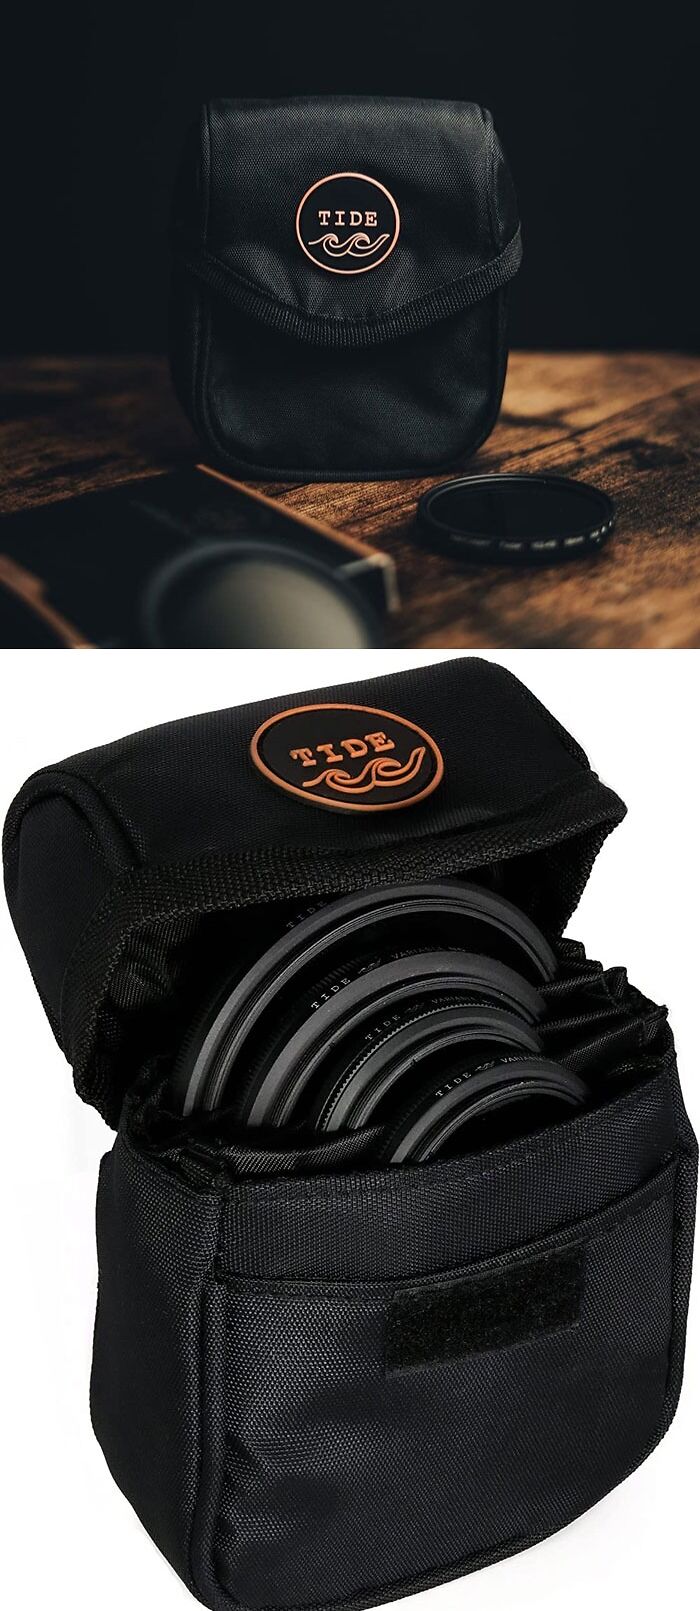 Protective Case Bag For Photography Camera Filters